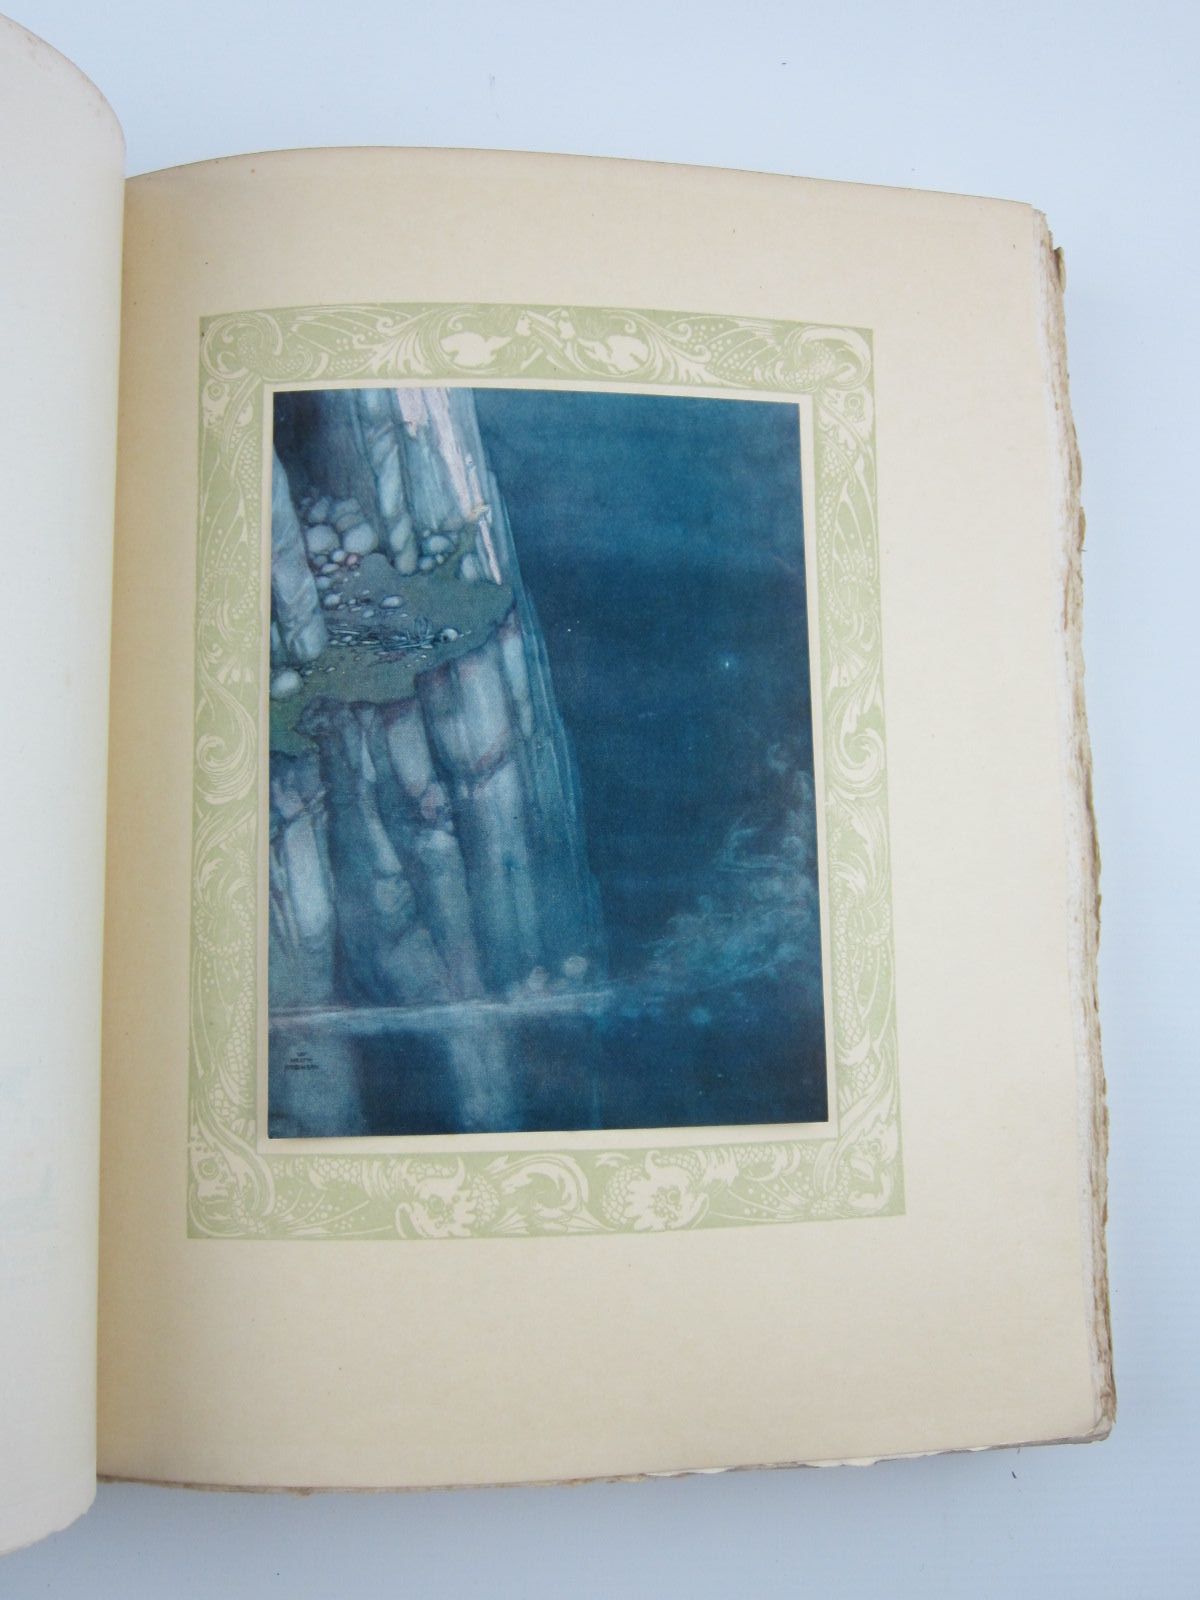 Photo of A SONG OF THE ENGLISH written by Kipling, Rudyard illustrated by Robinson, W. Heath published by Hodder & Stoughton (STOCK CODE: 1309776)  for sale by Stella & Rose's Books